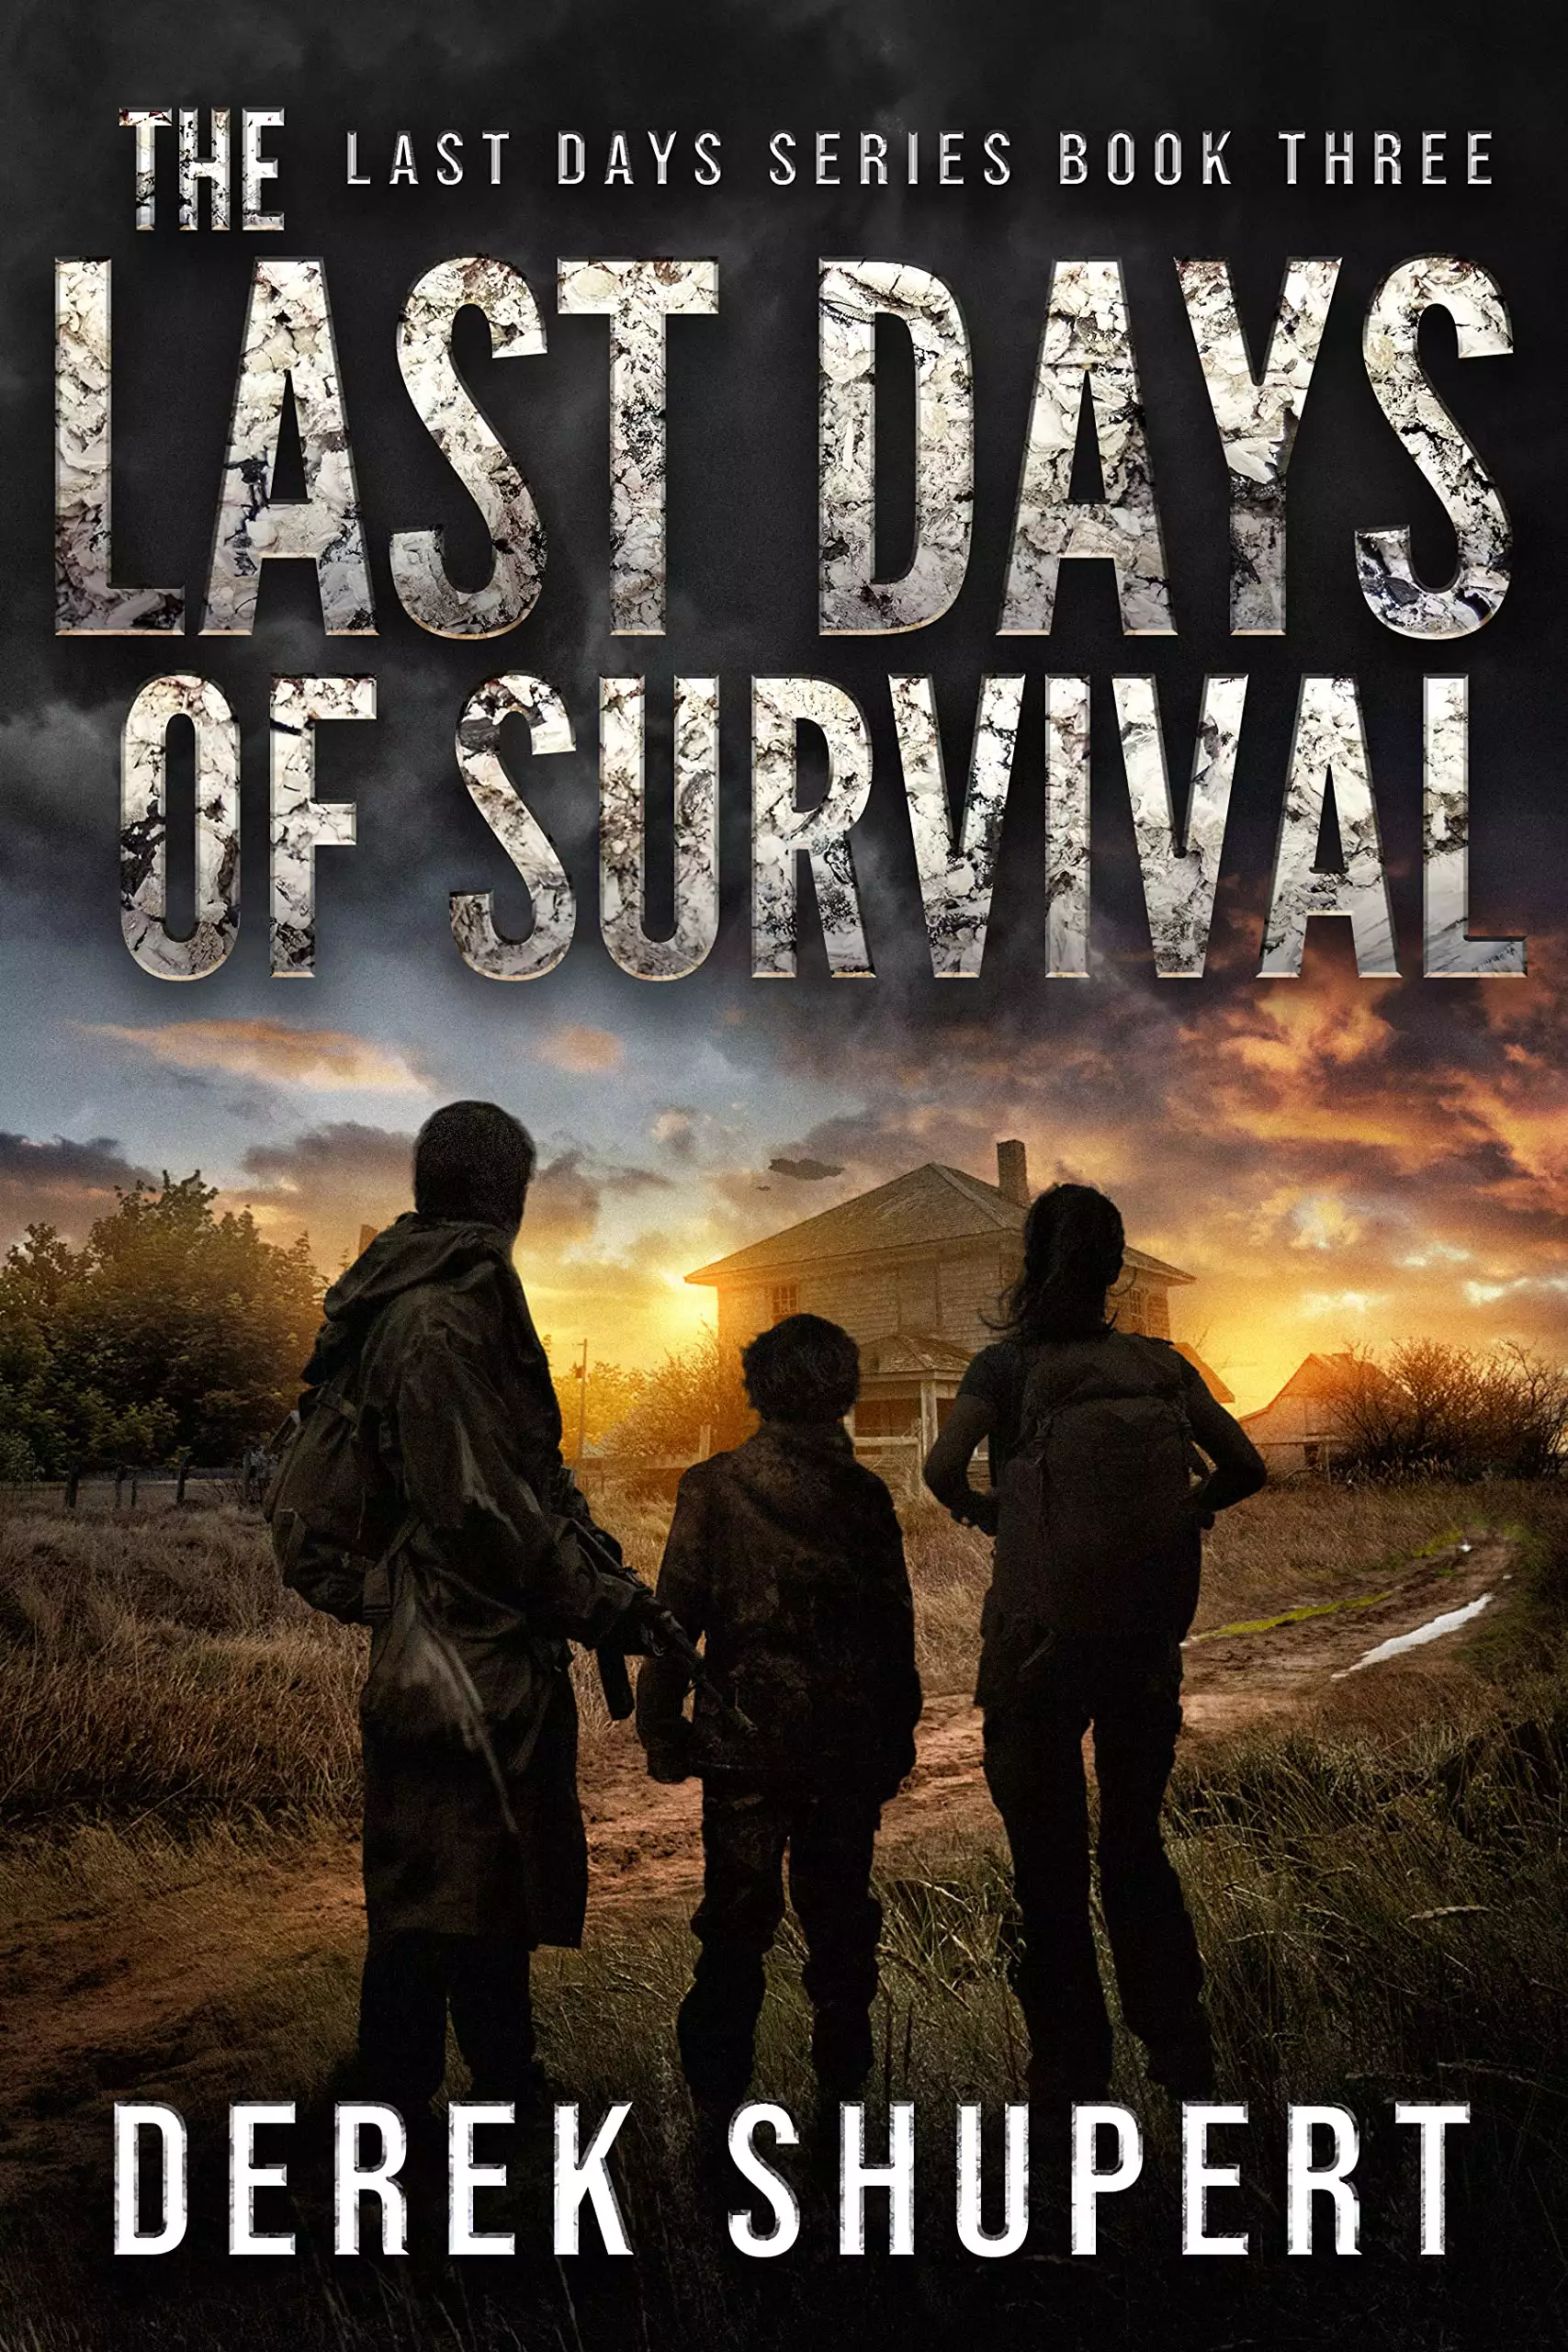 The Last Days of Survival: A Post-Apocalyptic Survival Thriller